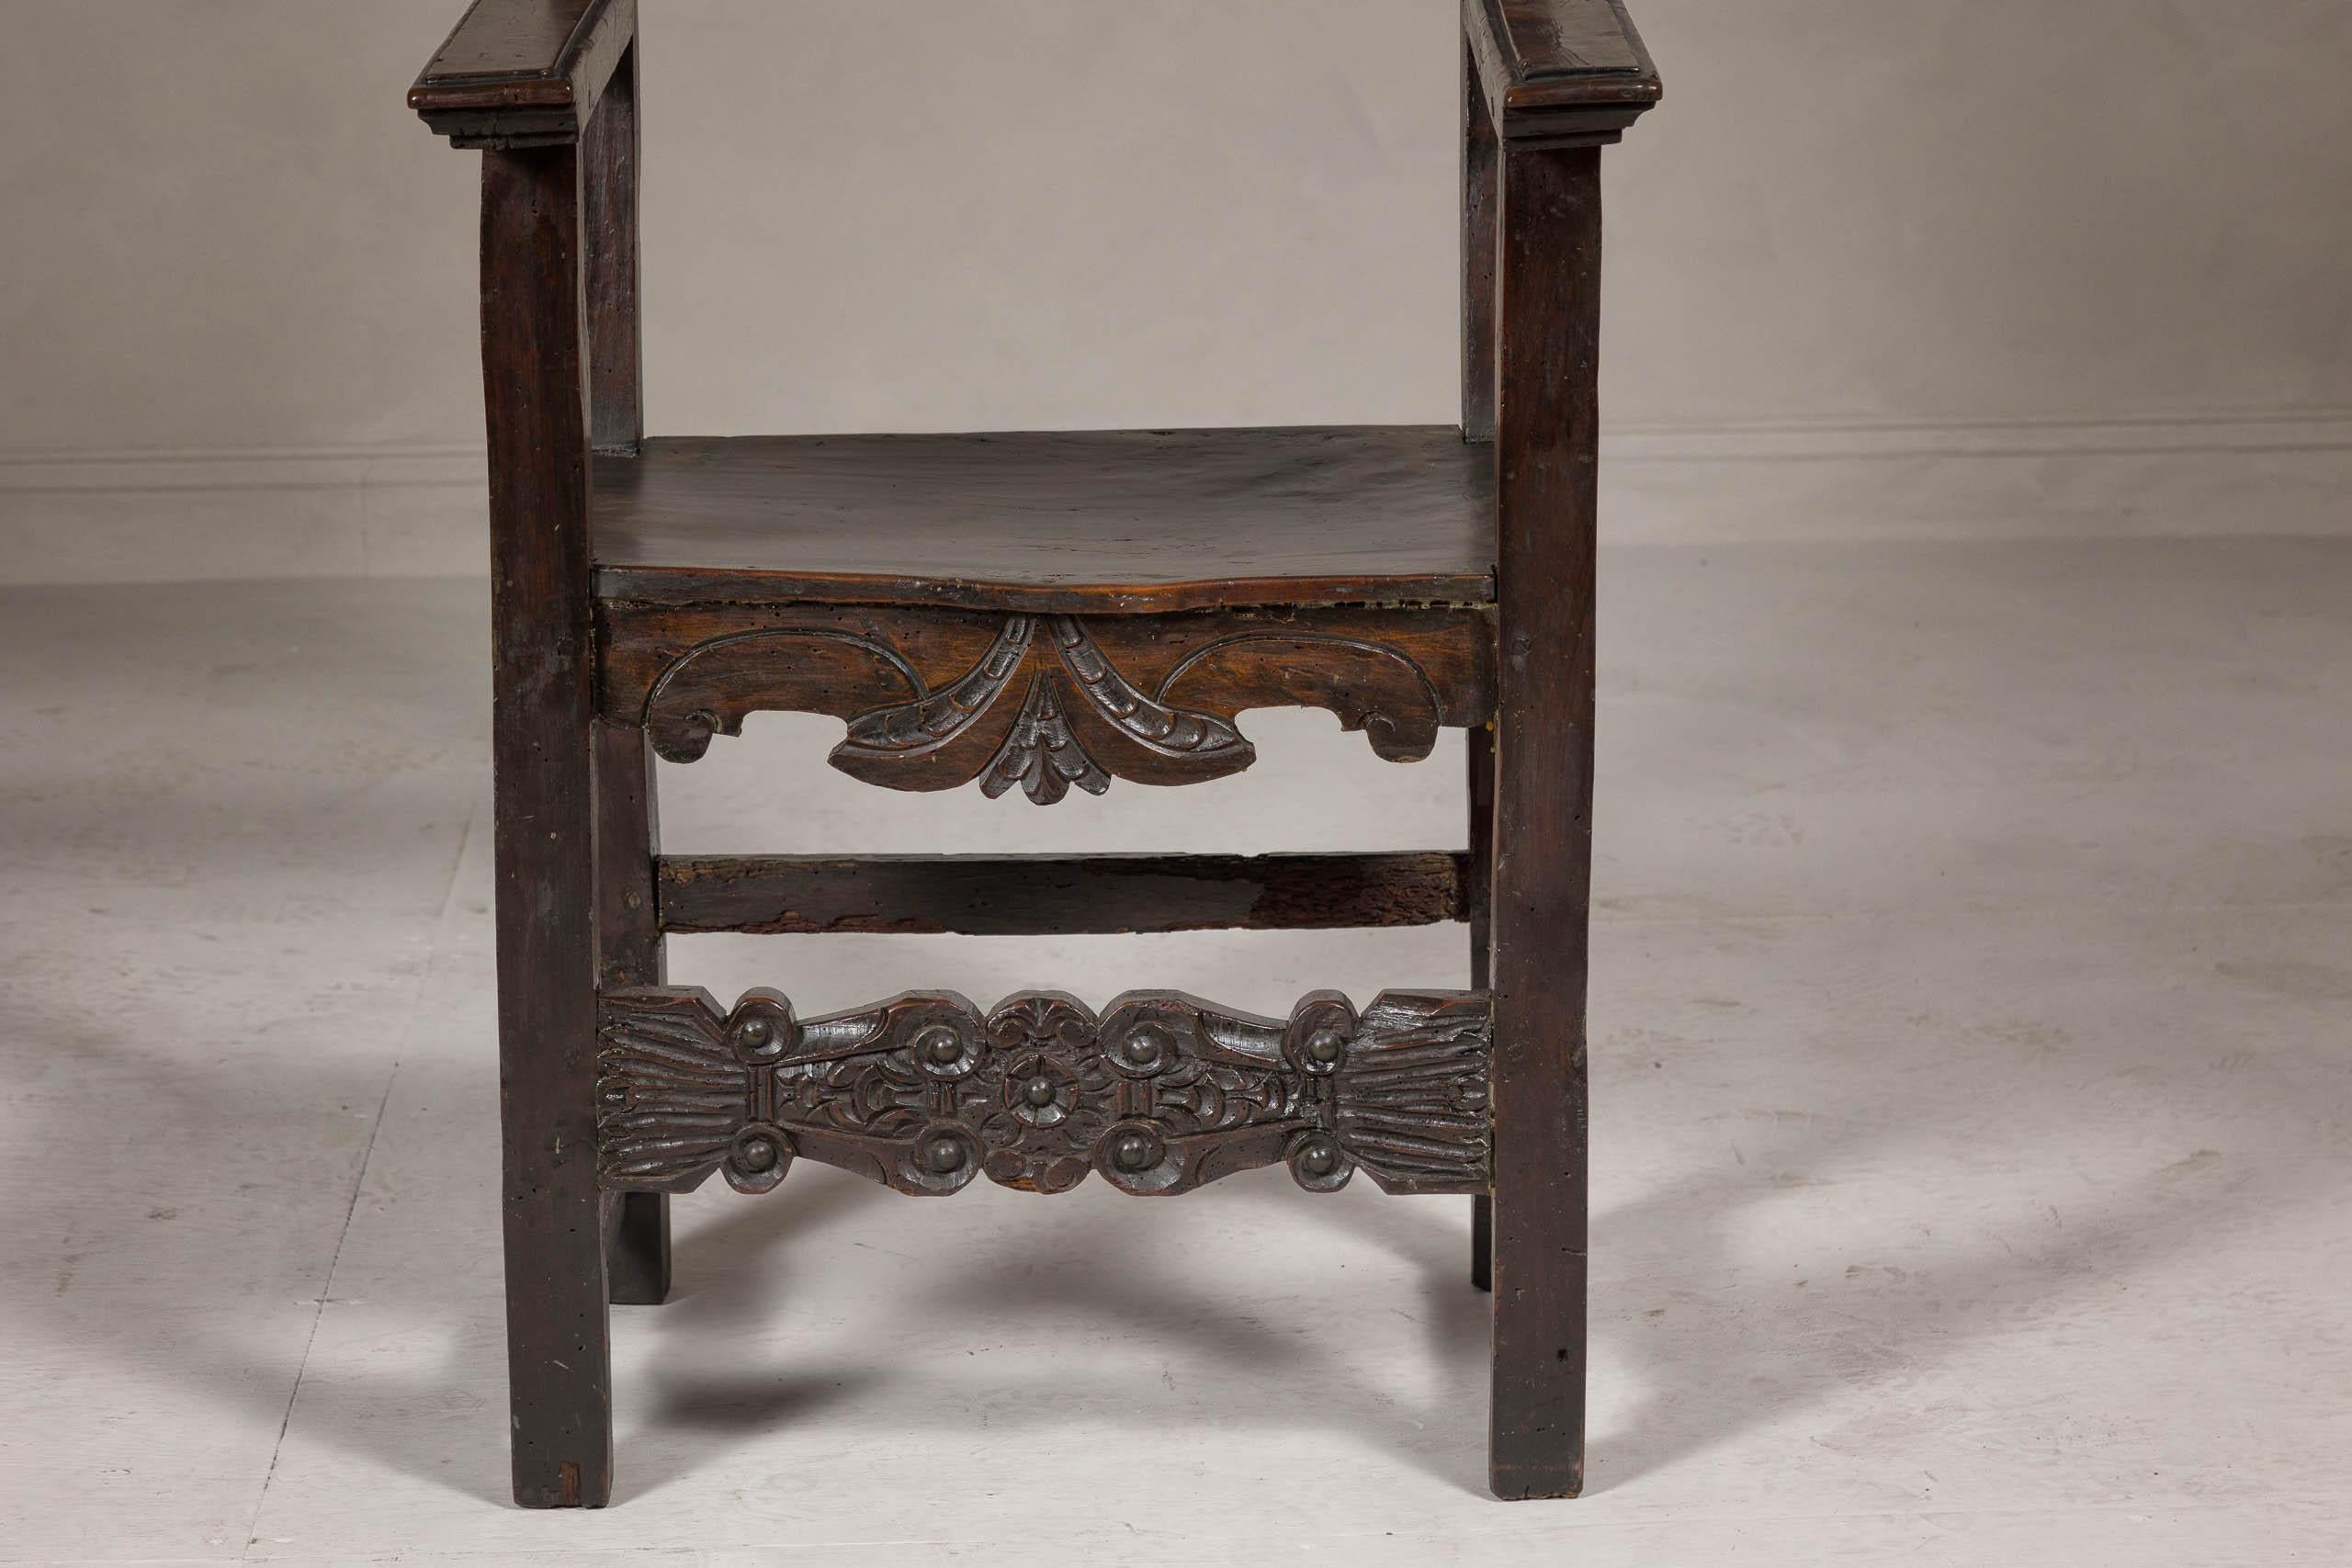 Antique High Back Wooden Throne Chair with Richly Hand-Carved Back and Skirt In Good Condition For Sale In Yonkers, NY